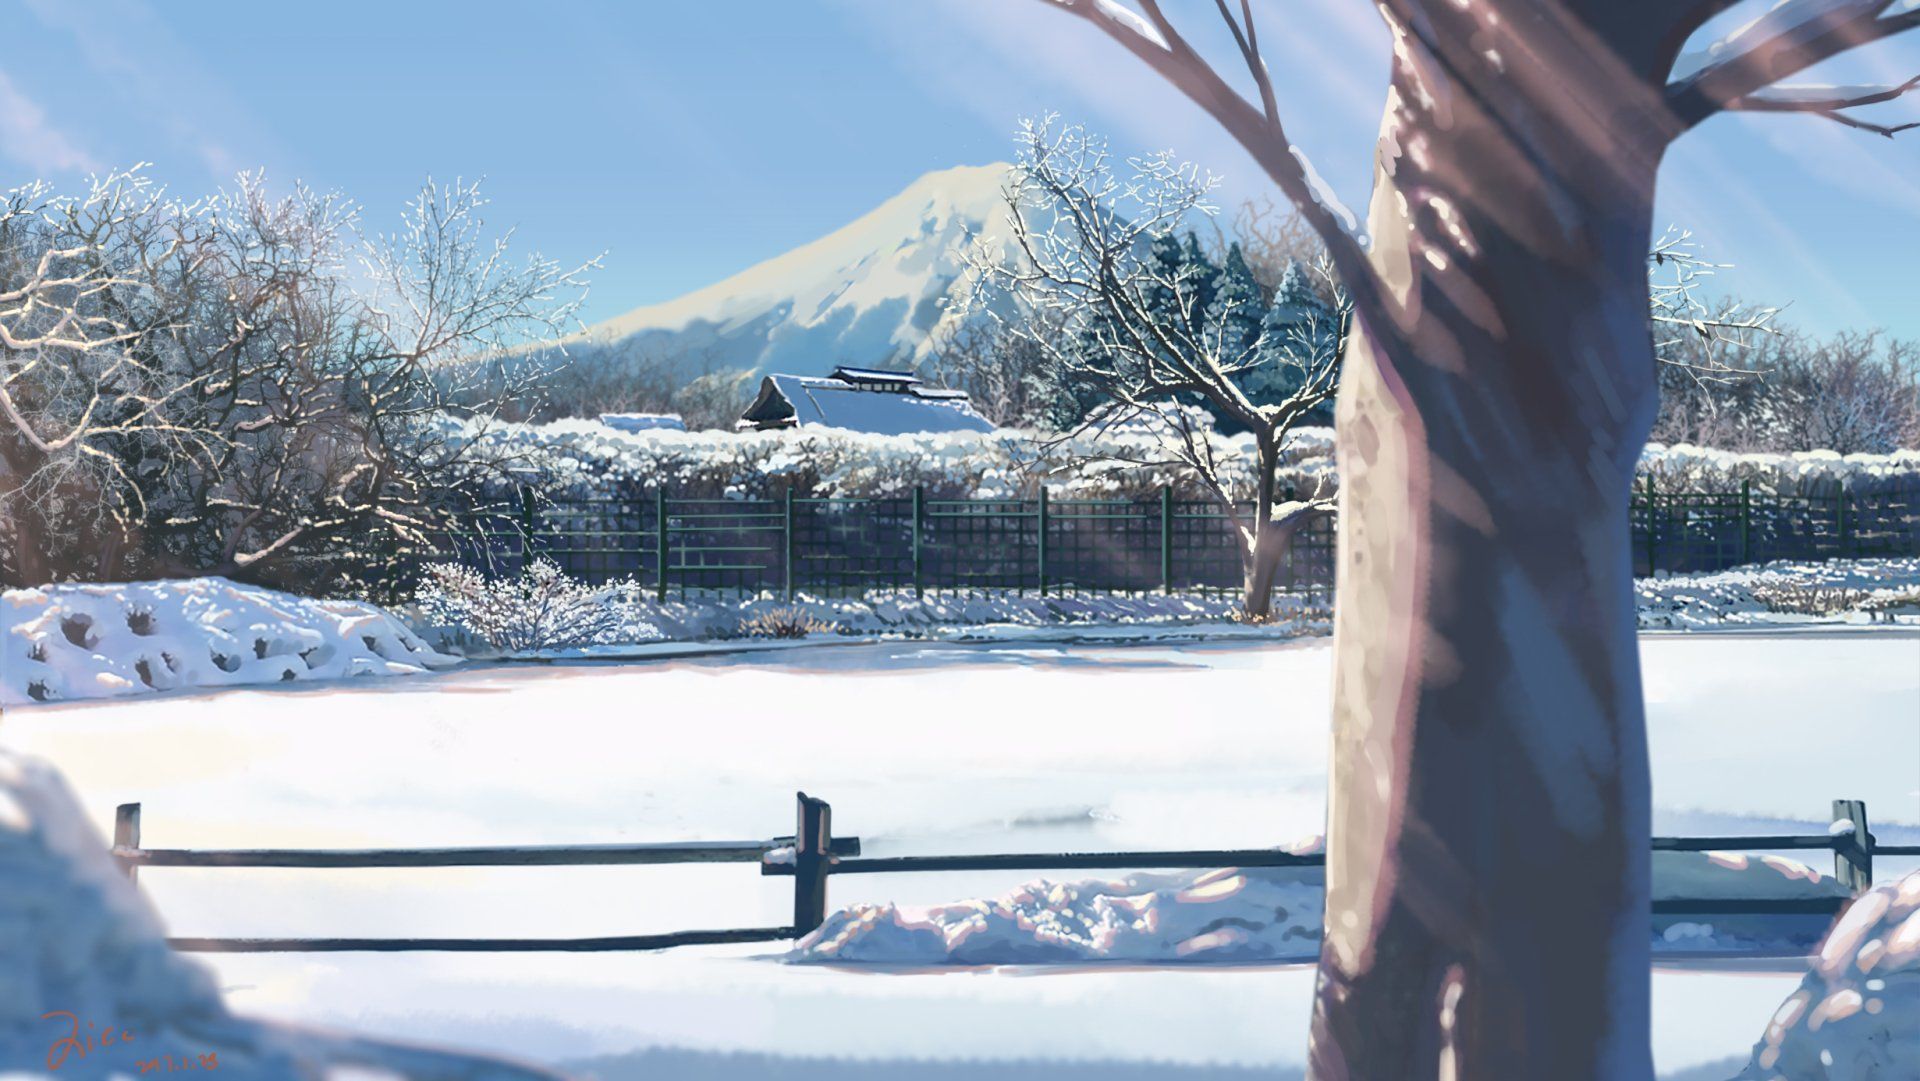 Background Image. Click pic to full HD #winteranime #winter #art #anime #backgr. Image. Click pic to full HD #winteranime #winter #art #anime , 2020